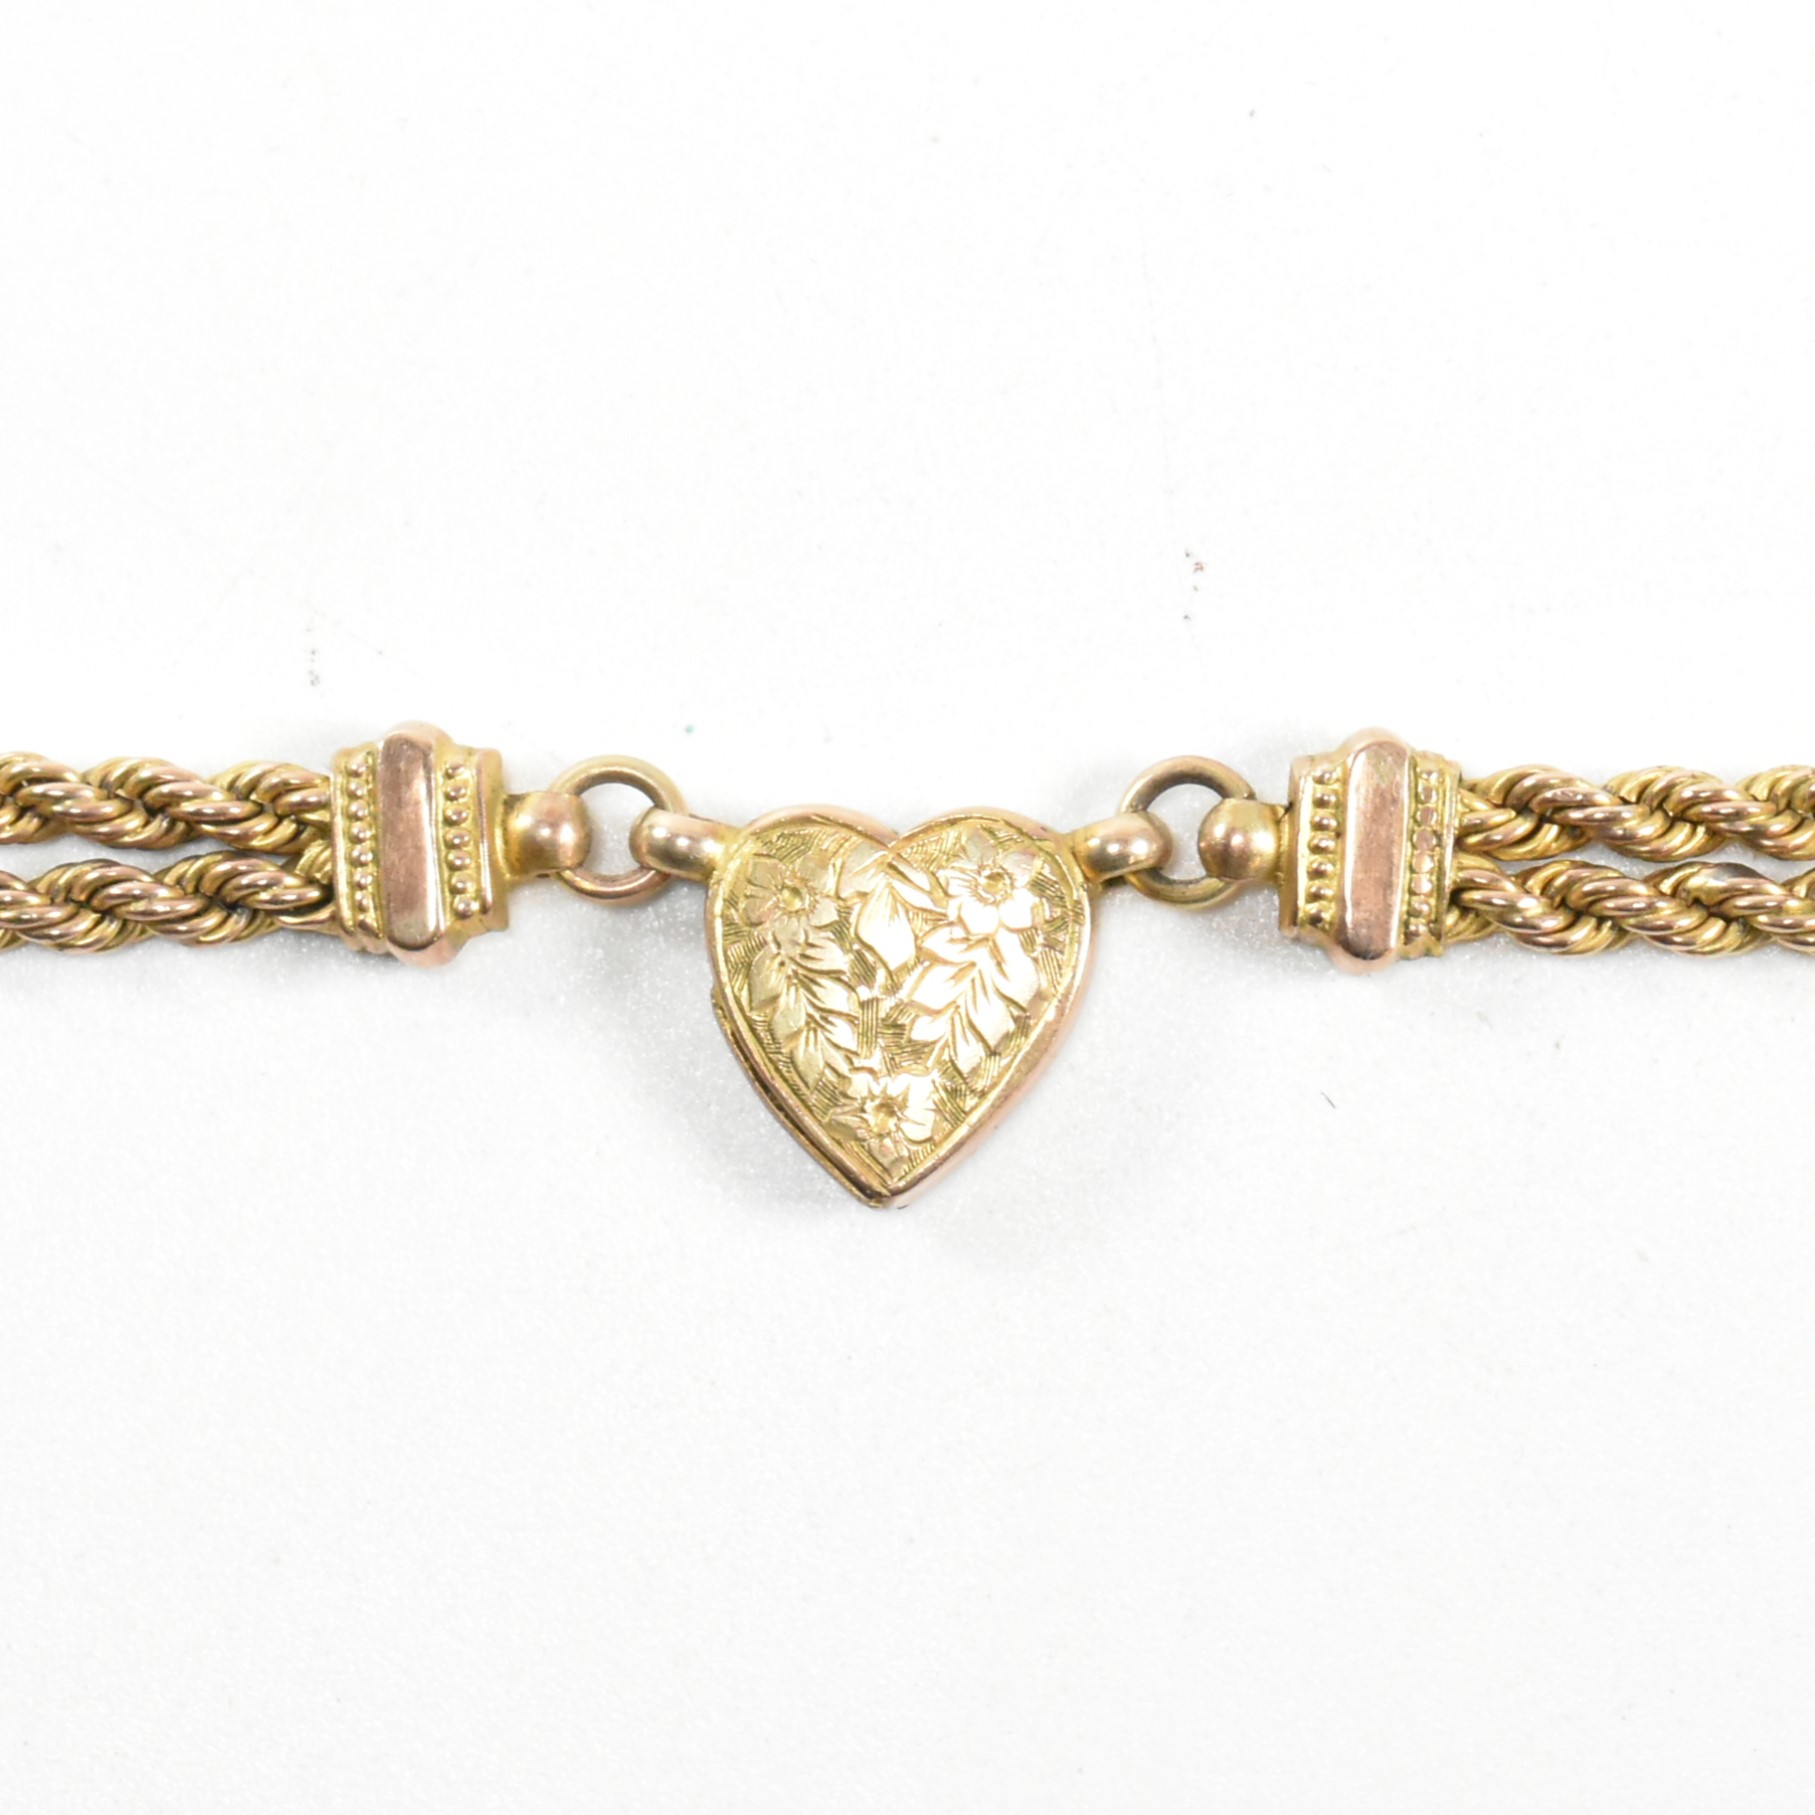 VICTORIAN 9CT GOLD LEONTINE WATCH CHAIN - Image 4 of 7